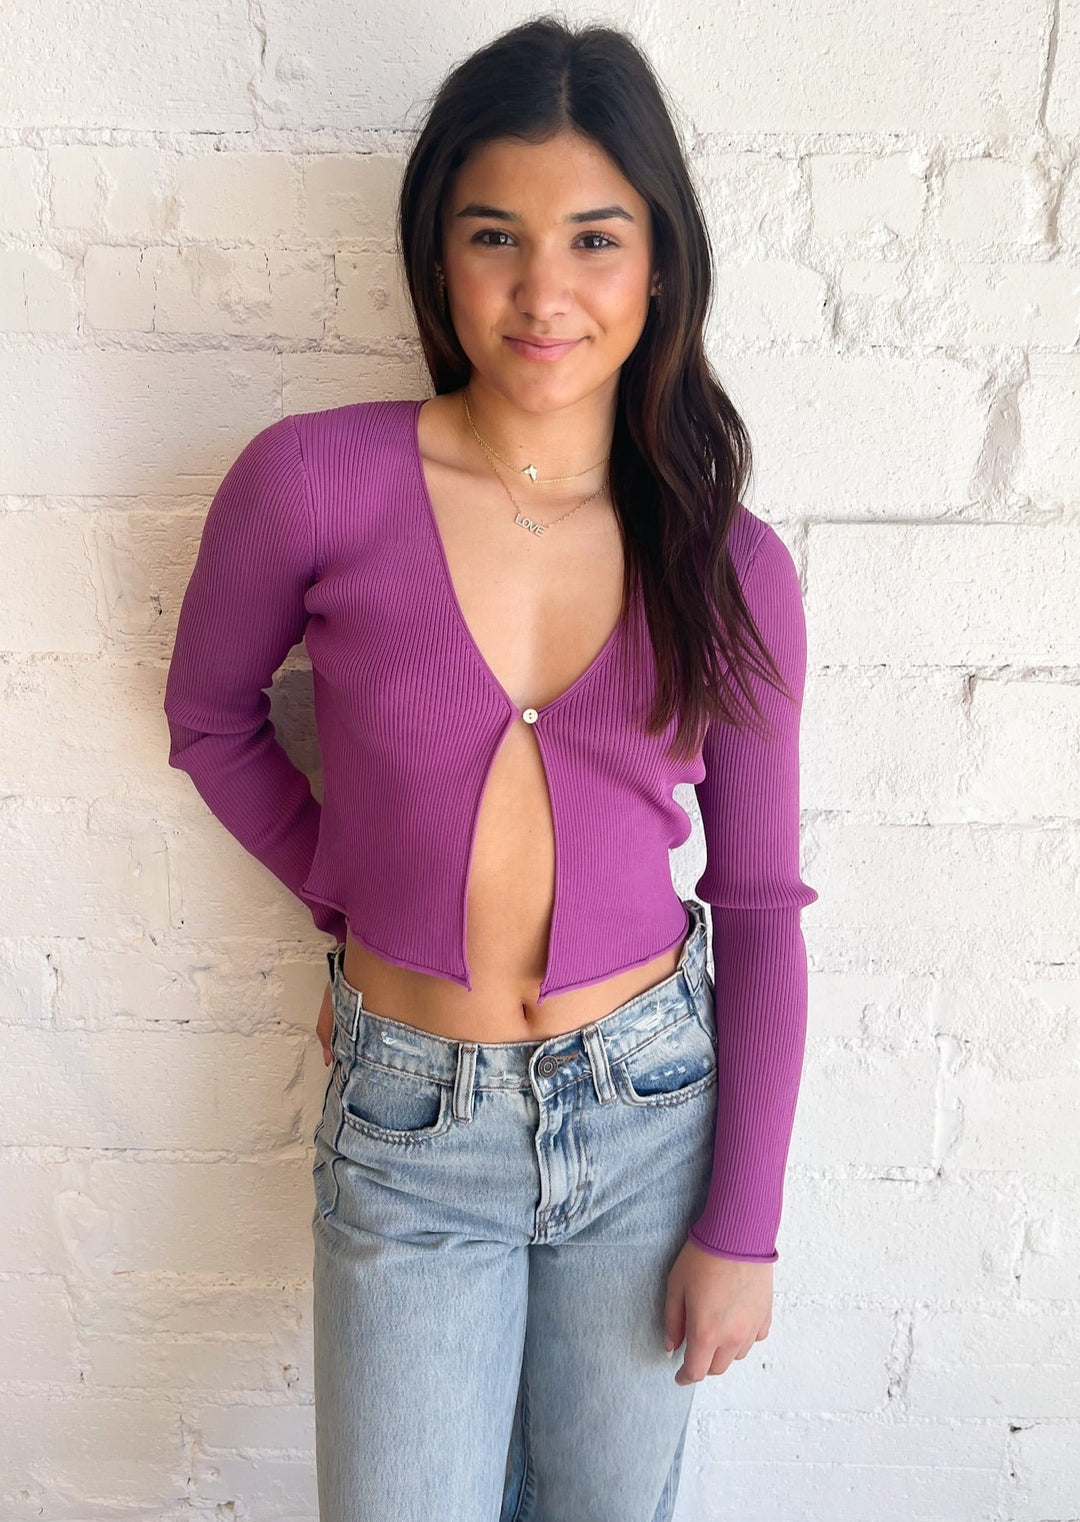 Here To Mingle Top, Tops, Adeline, Adeline, dallas boutique, dallas texas, texas boutique, women's boutique dallas, adeline boutique, dallas boutique, trendy boutique, affordable boutique